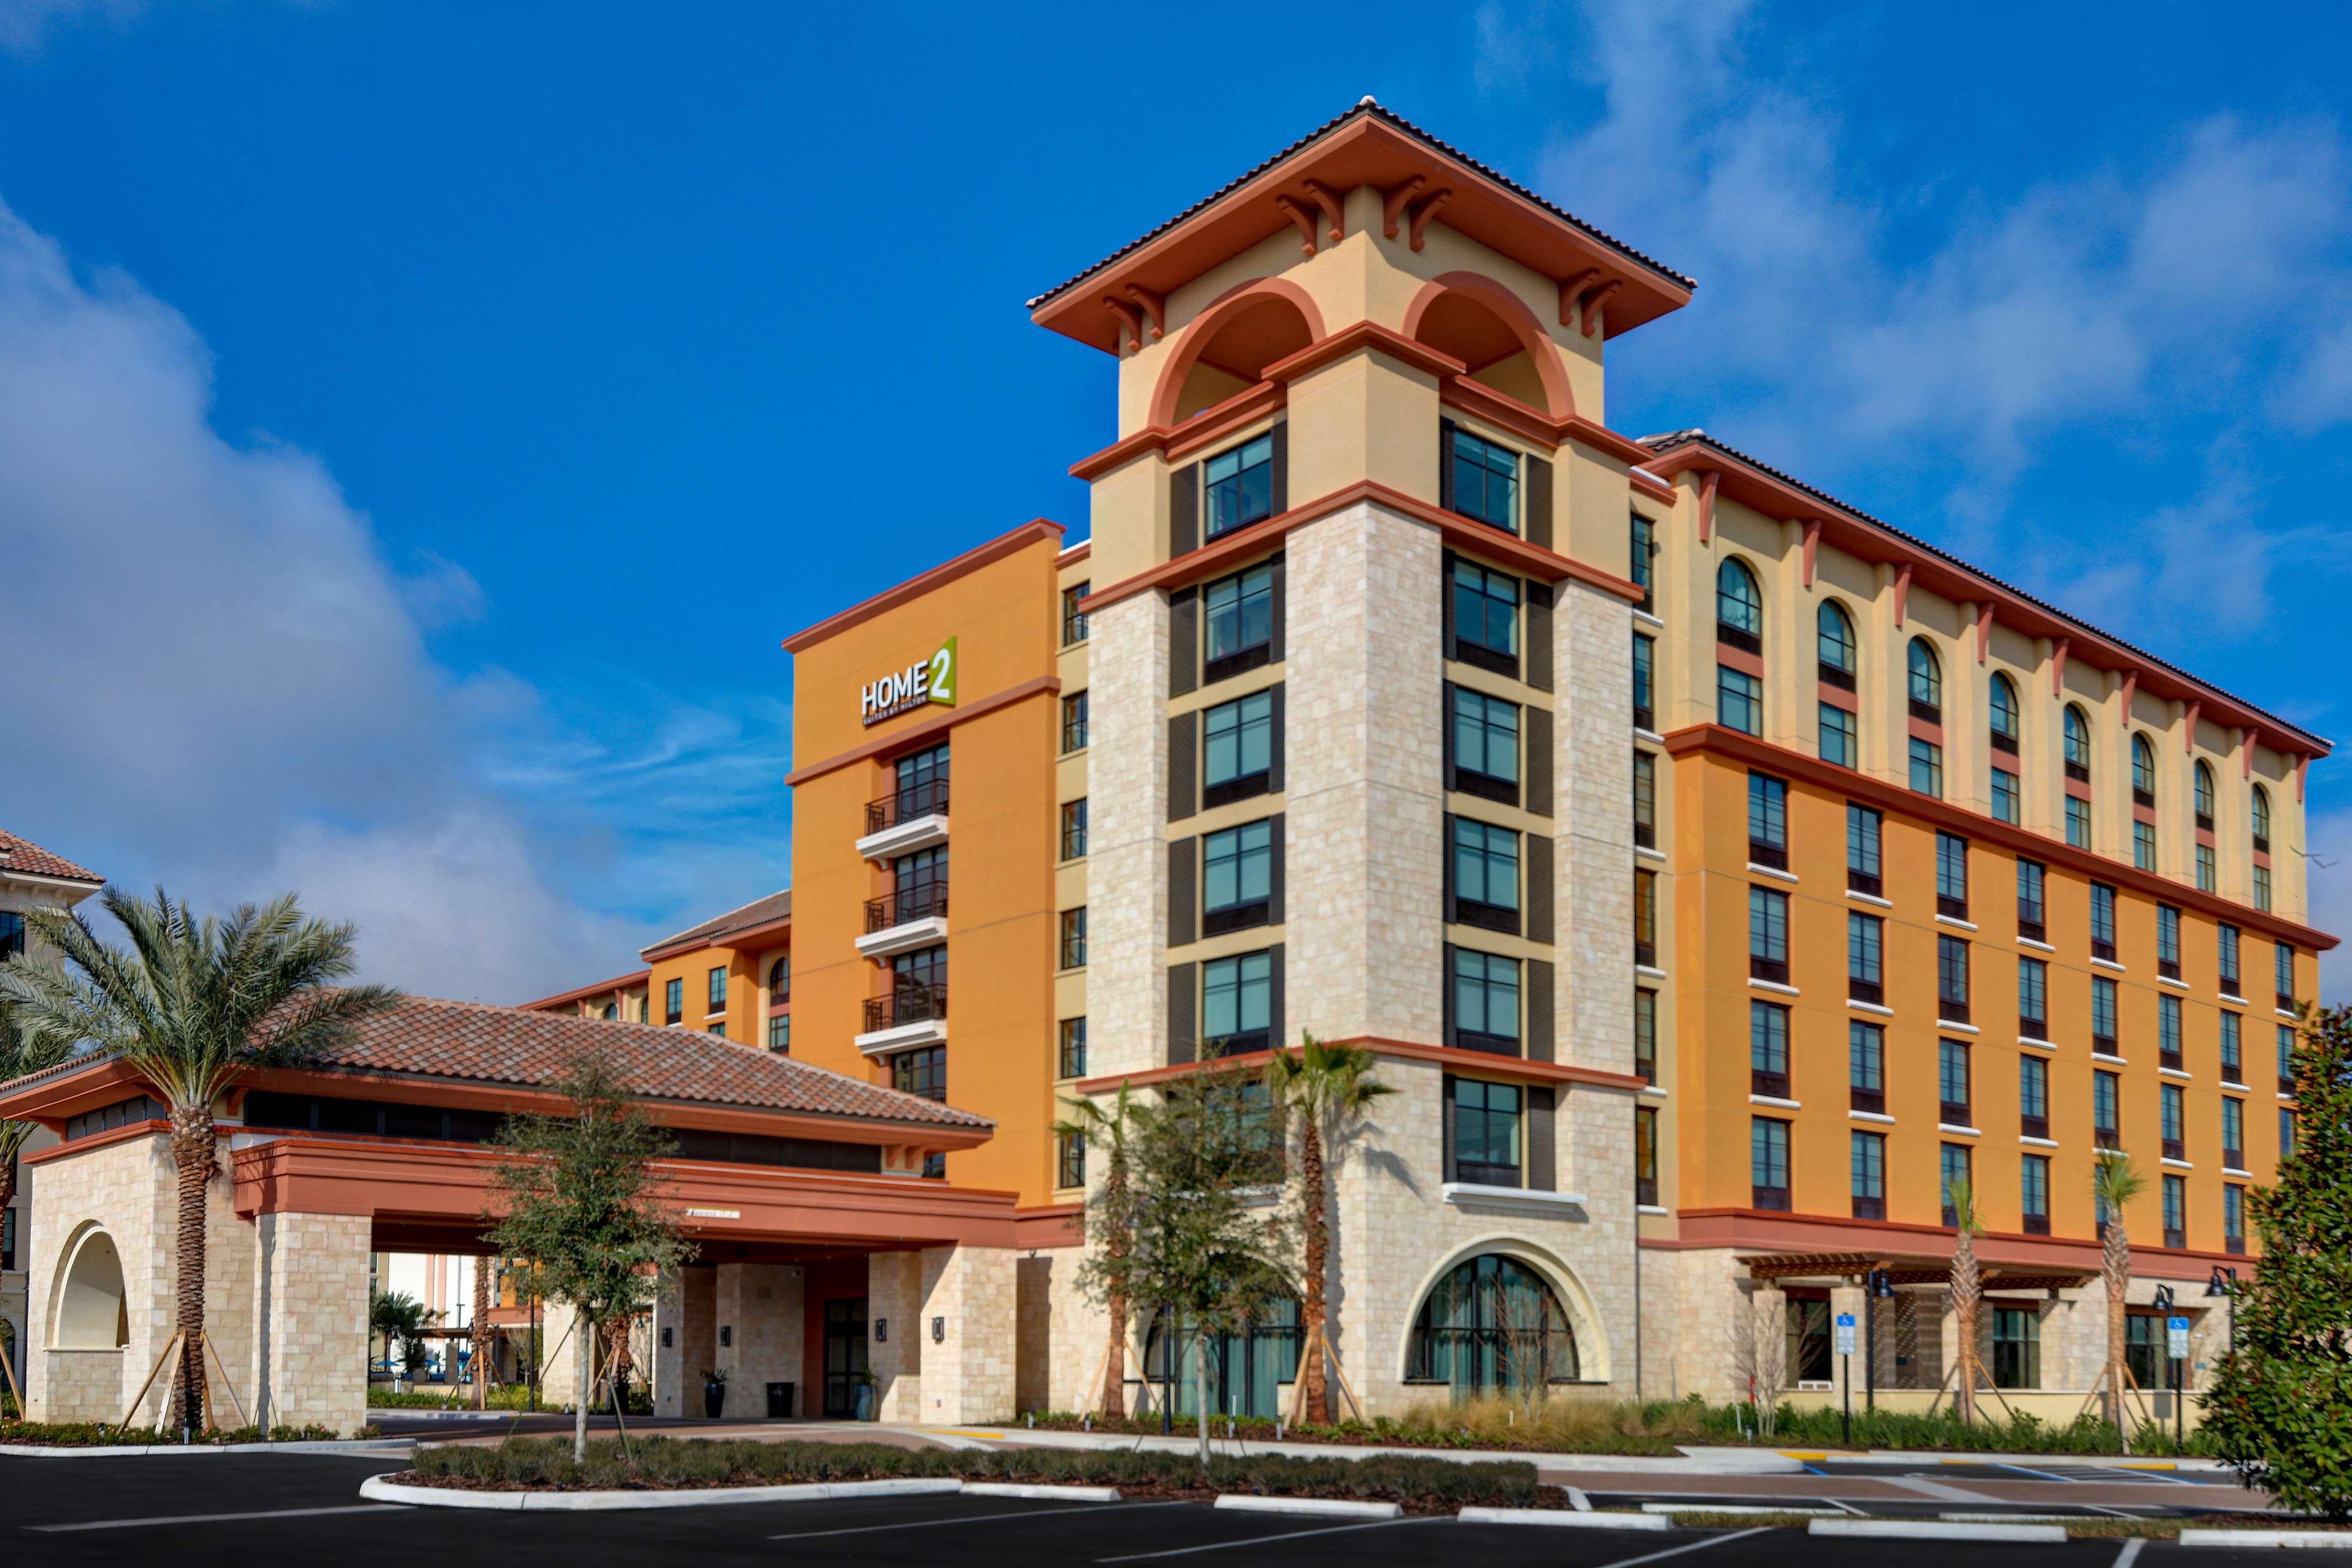 Home2 Suites by Hilton Orlando at FLAMINGO CROSSINGS Town Center image